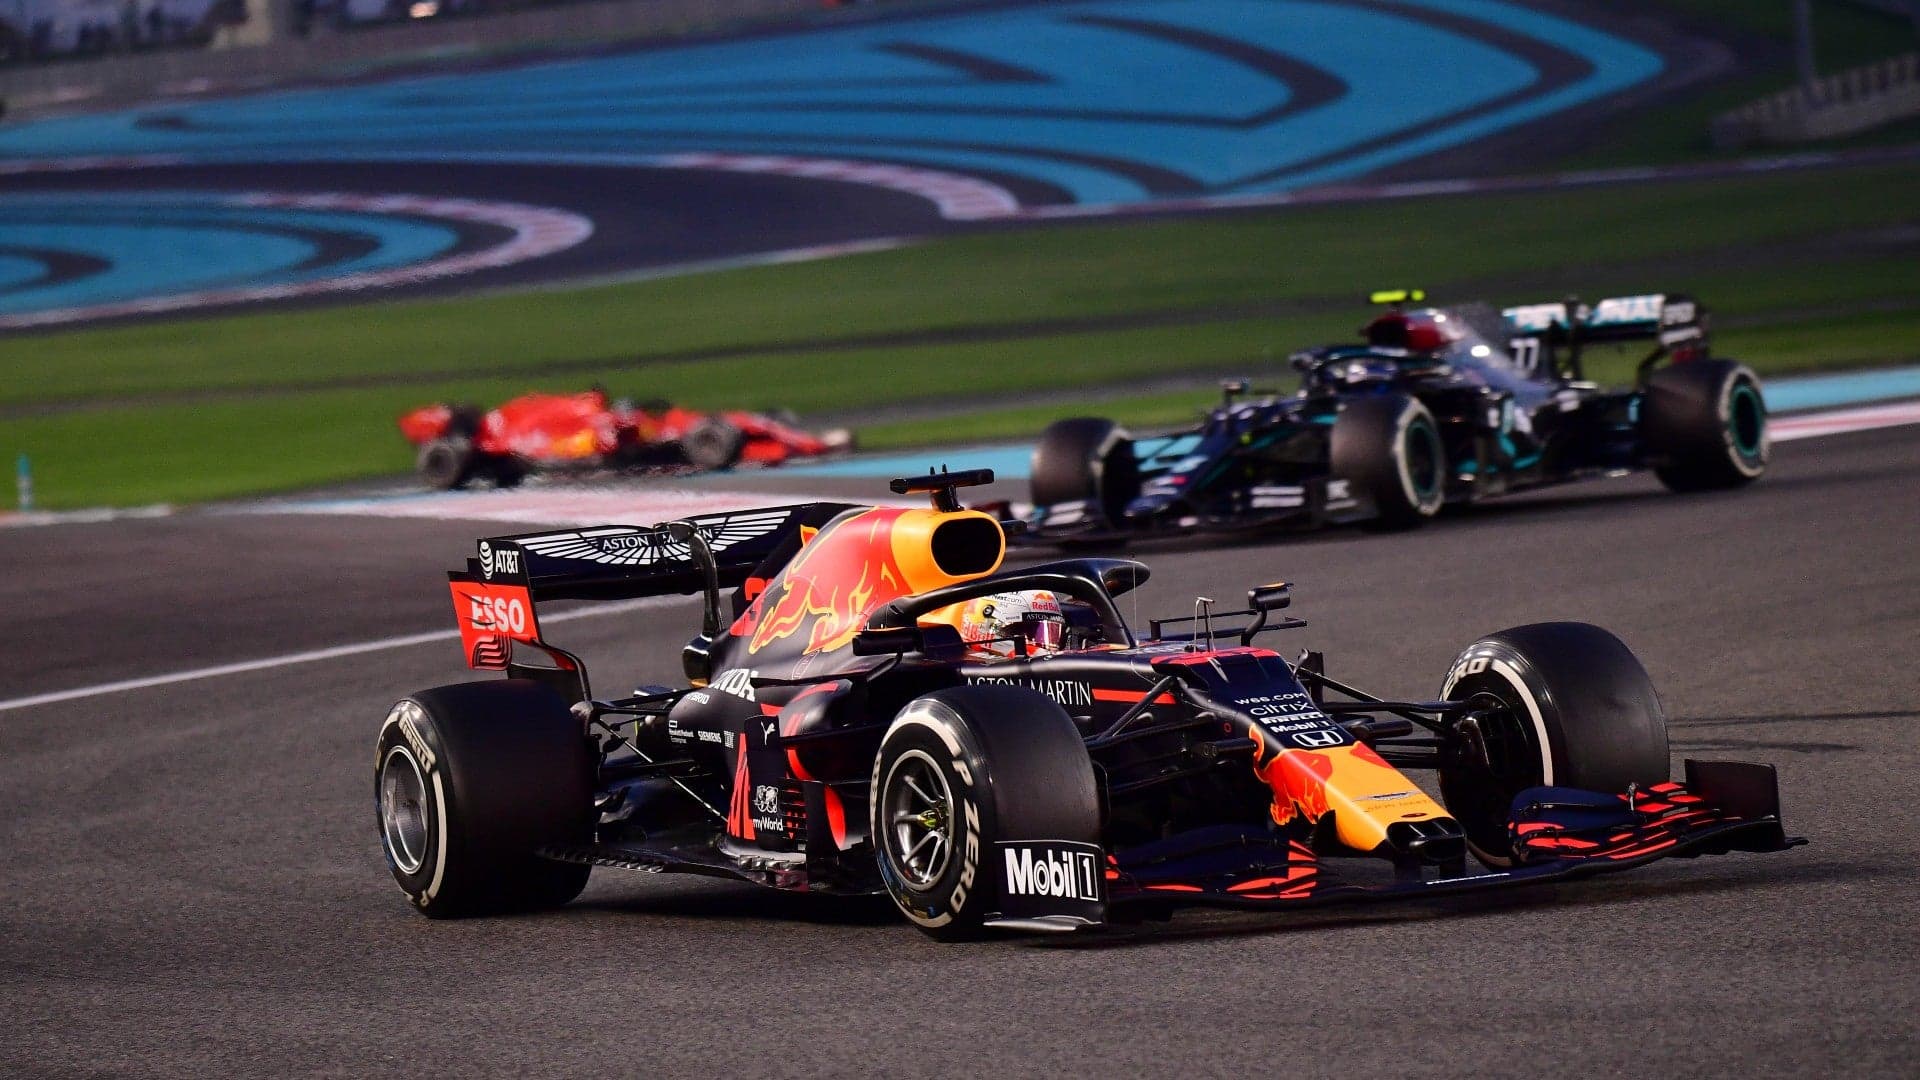 Max Verstappen Closes Book on 2020 F1 Season With Abu Dhabi Grand Prix Victory